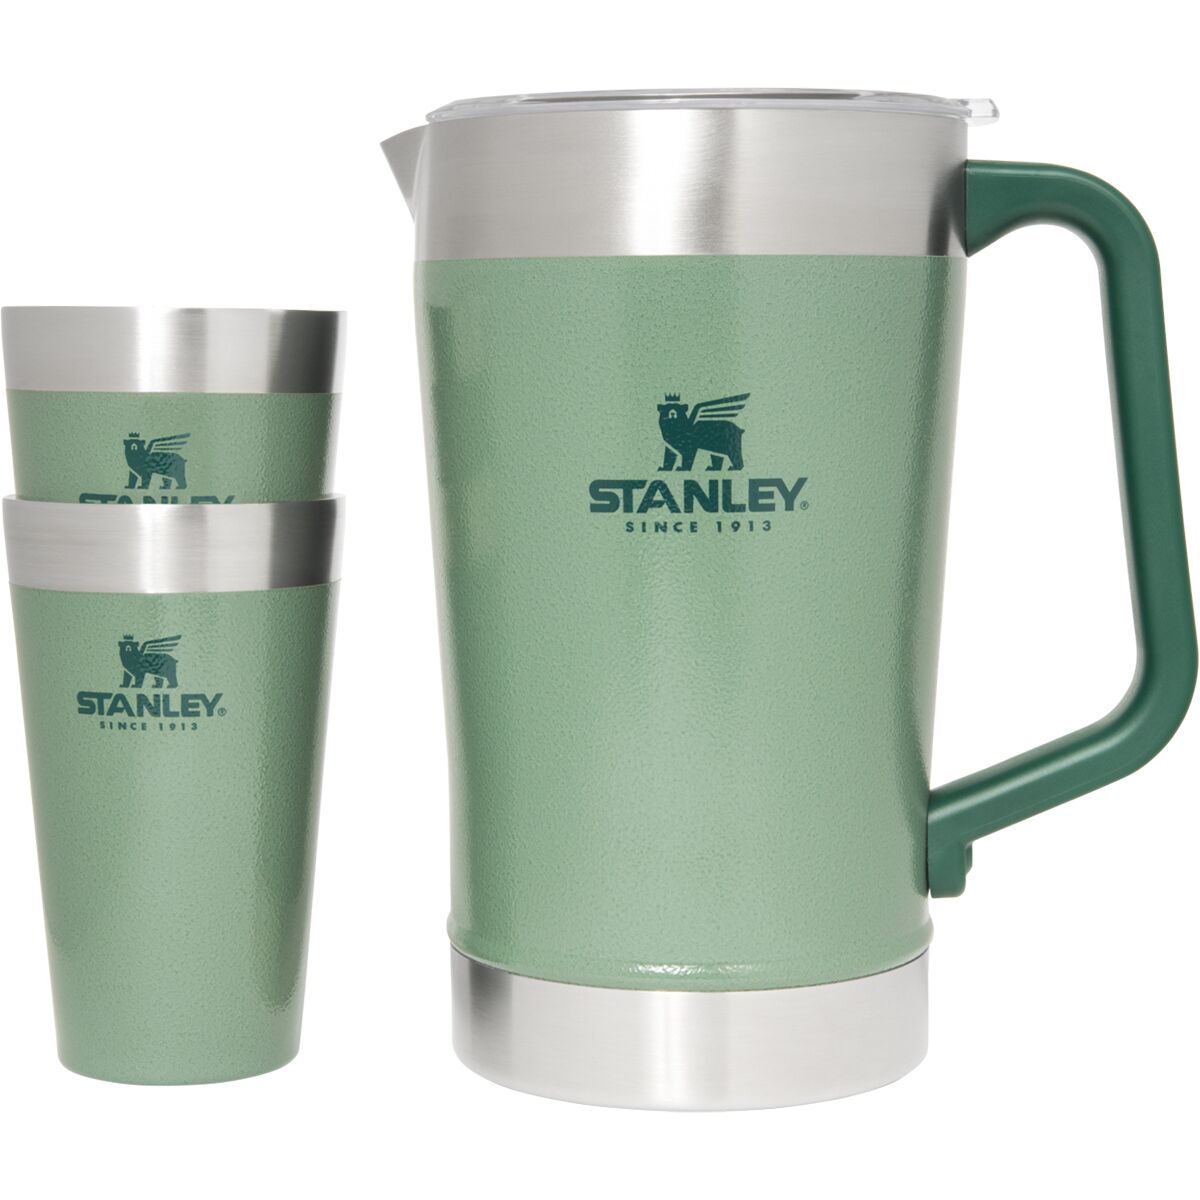 Stanley The Stay-Chill Classic 64oz Pitcher Set